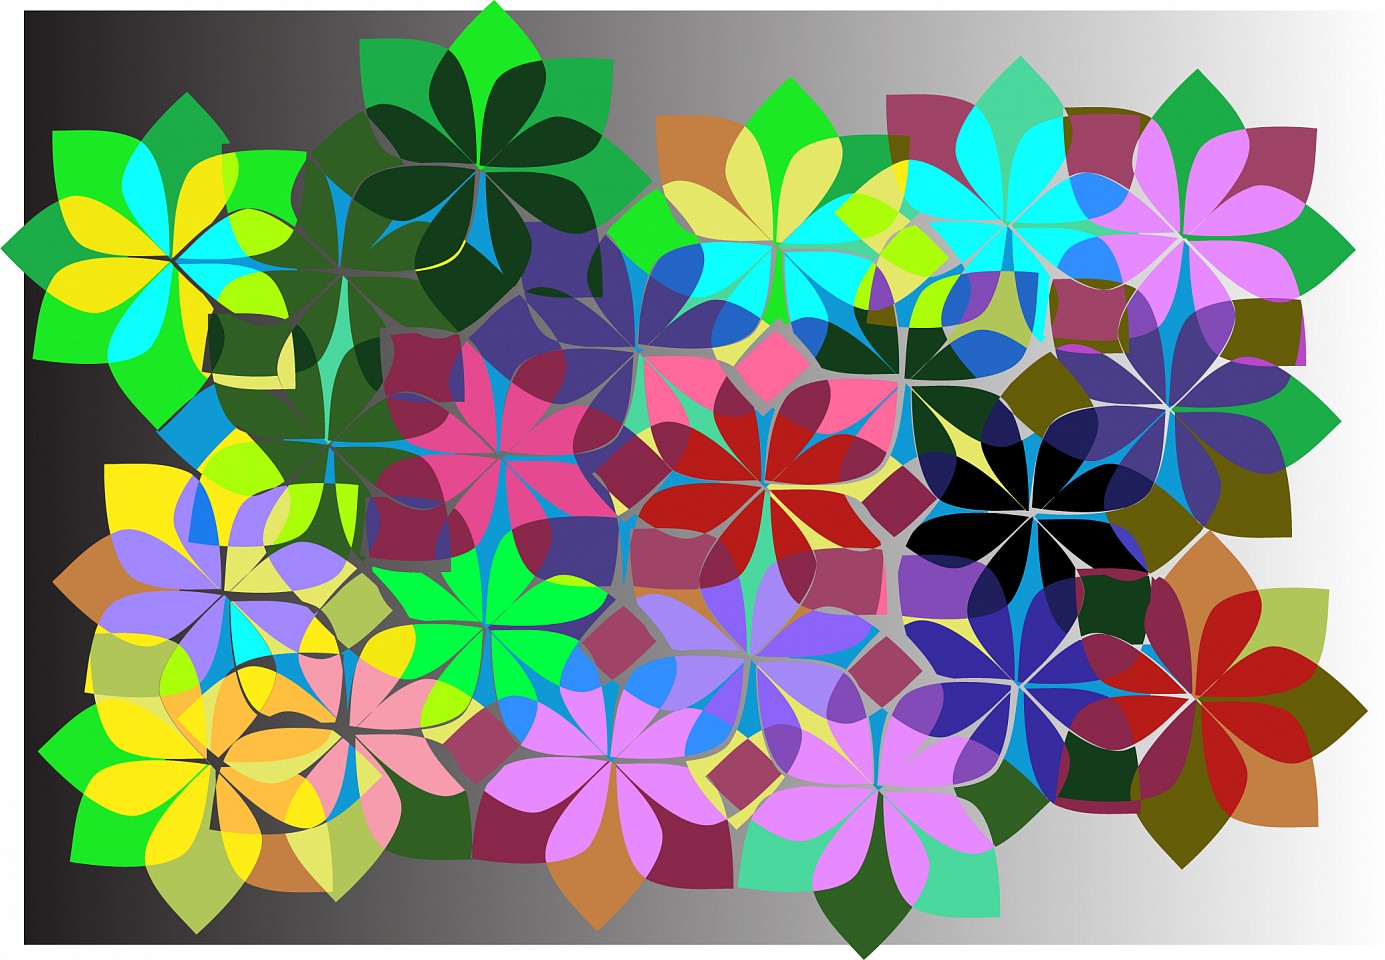 Dane Albert, Floral #4, 2023
Acrylic on canvas (Concept), 48 x 72 in. (121.9 x 182.9 cm)
Series of colored lines and shapes in multiple configurations
DA.2023.floral-004